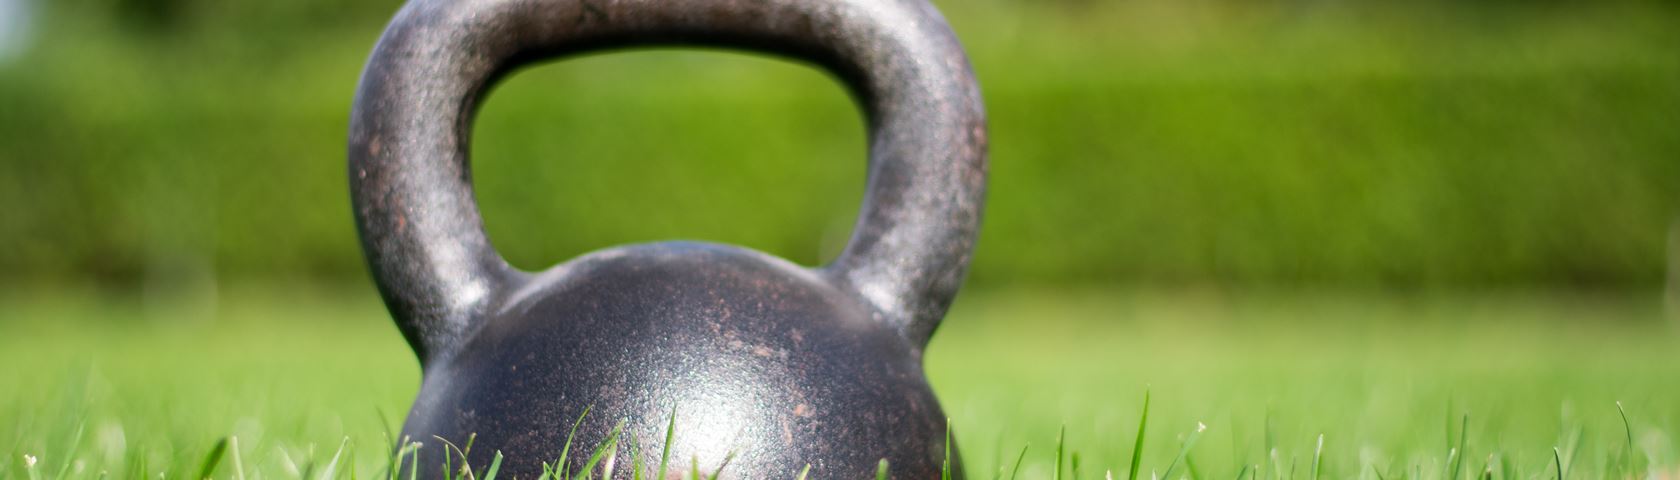 Kettlebell - In the wild